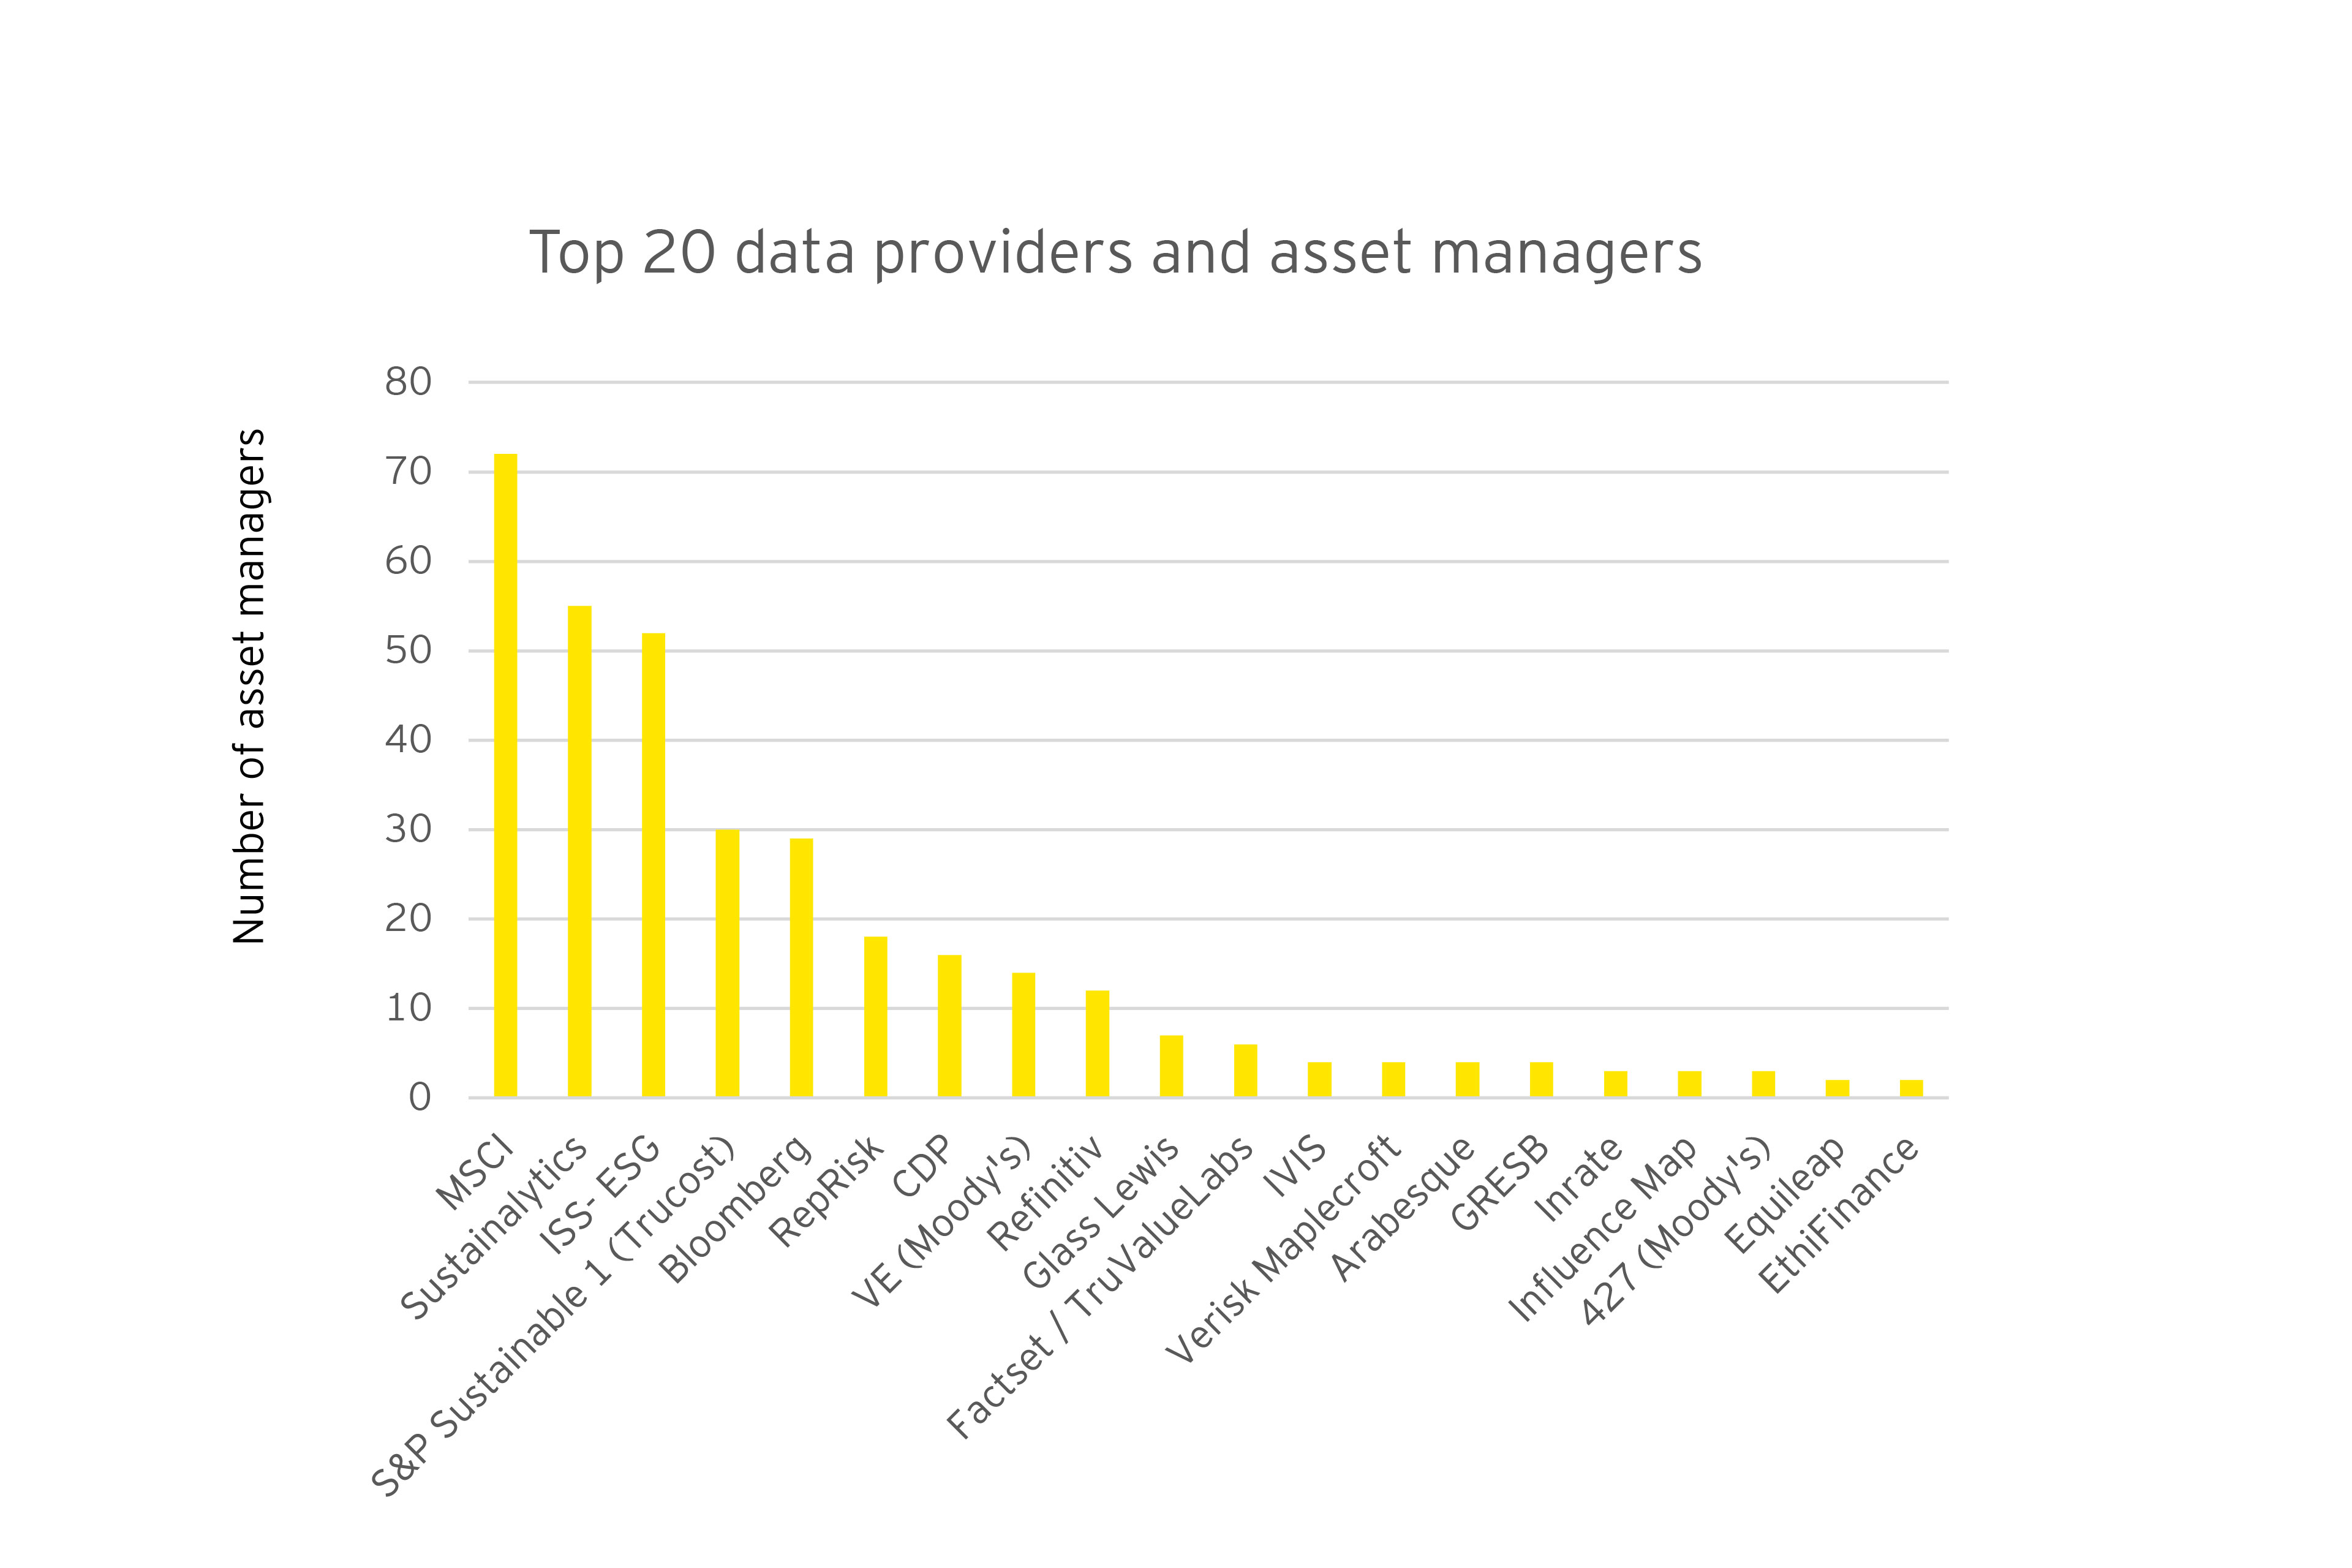 Top 20 data providers used by asset managers